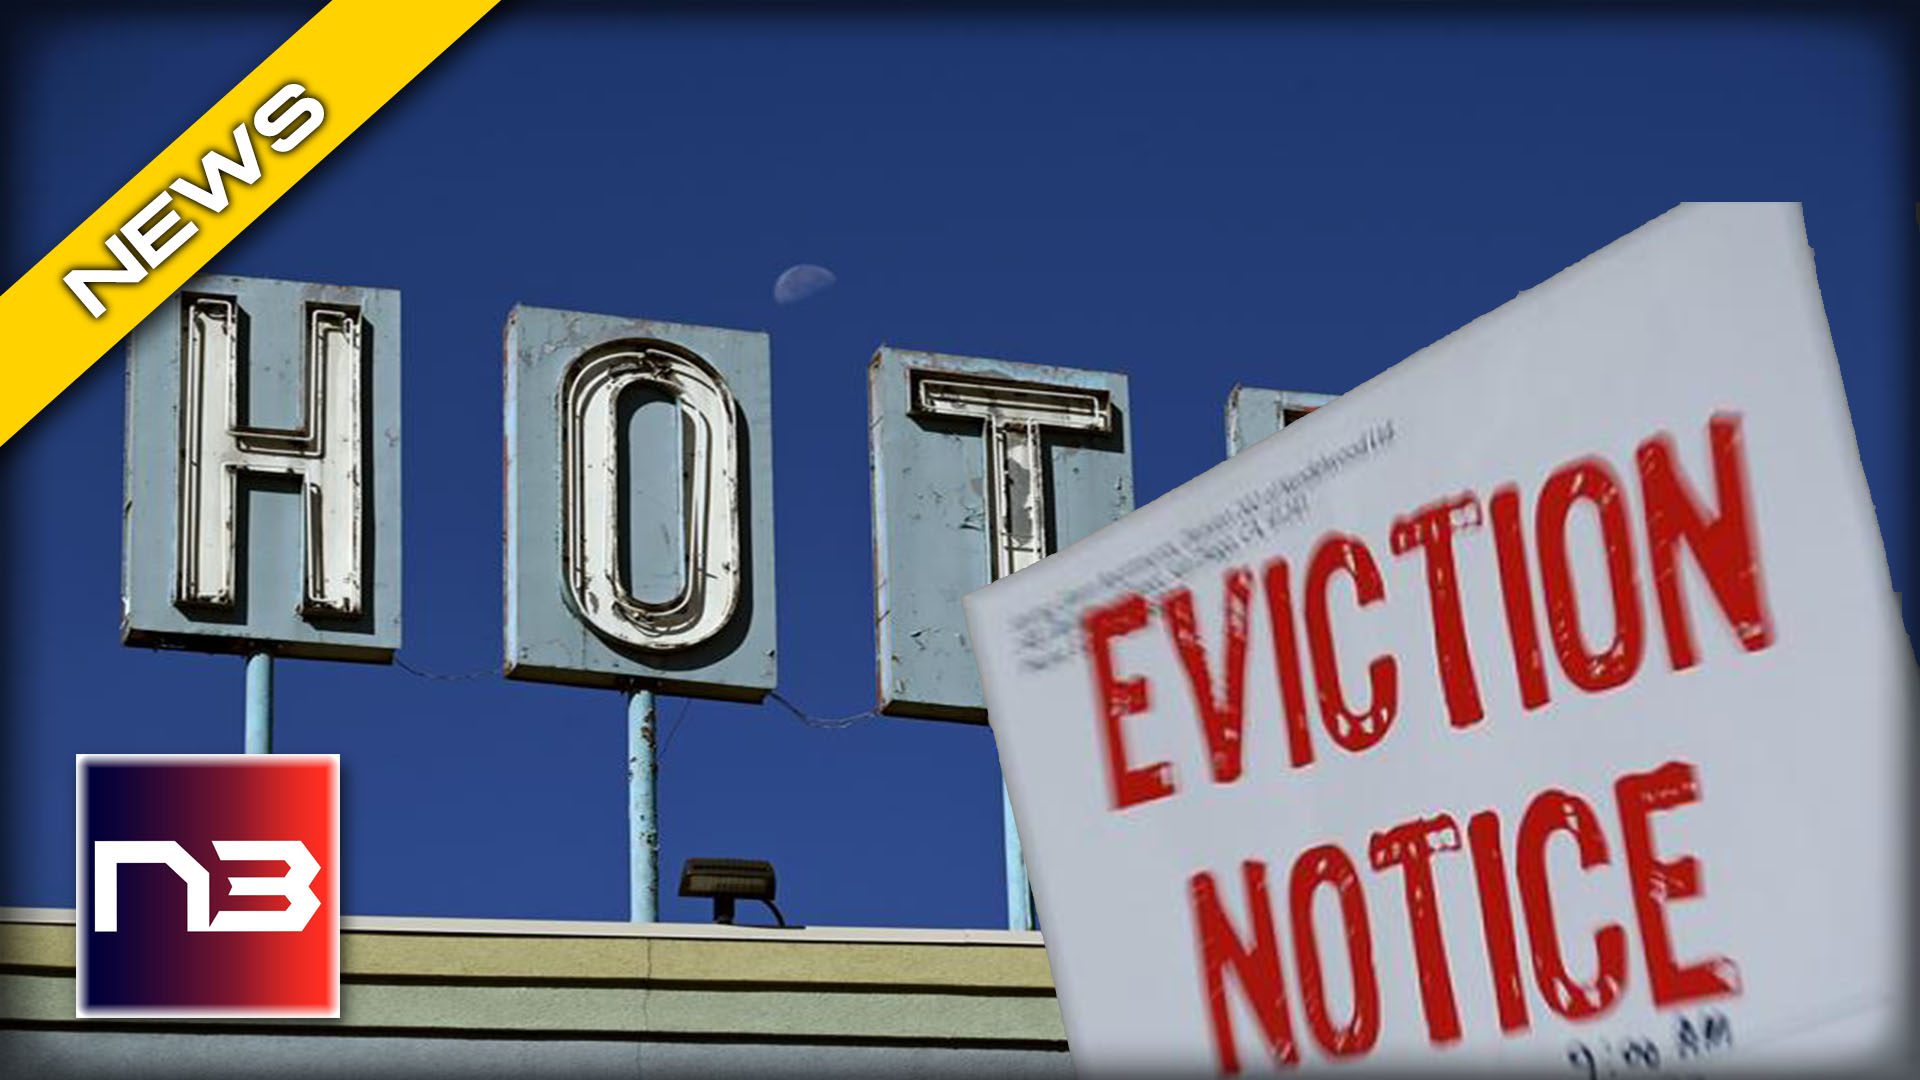 IT BEGINS: Waves of Homeless About To Hit Streets as “Pandemic Refugee” Evictions Take Hold